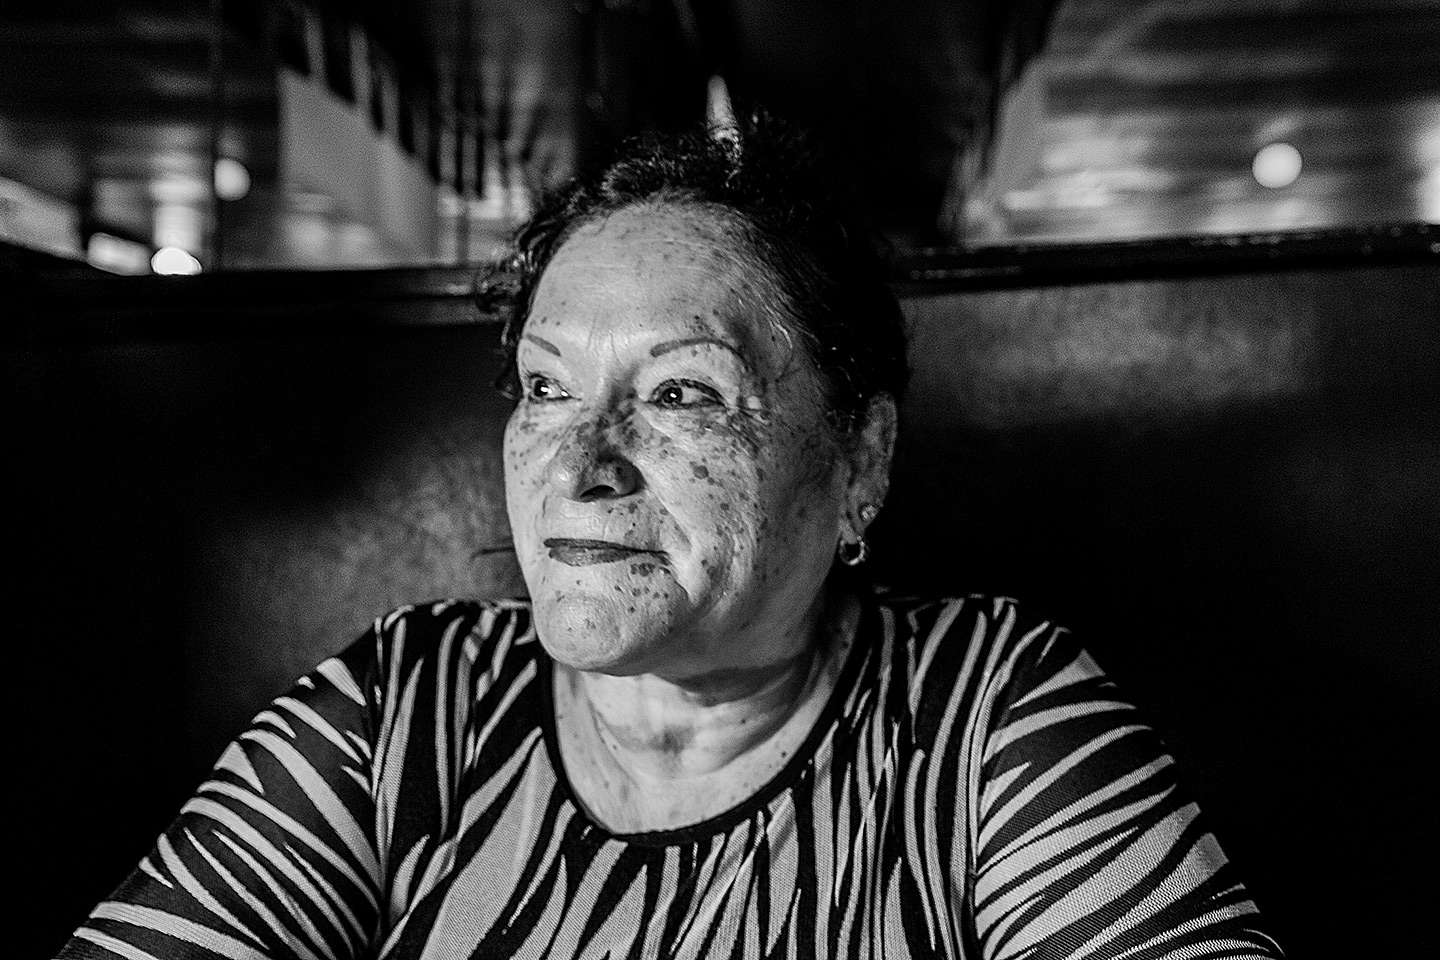 Steve Salinas mom- Disappearing New York - Subway Bar Inn after 75 years had to move to make room for another luxury high rise apartment building. : Disappearing NY - Subway Bar Inn : New York City portrait photographer